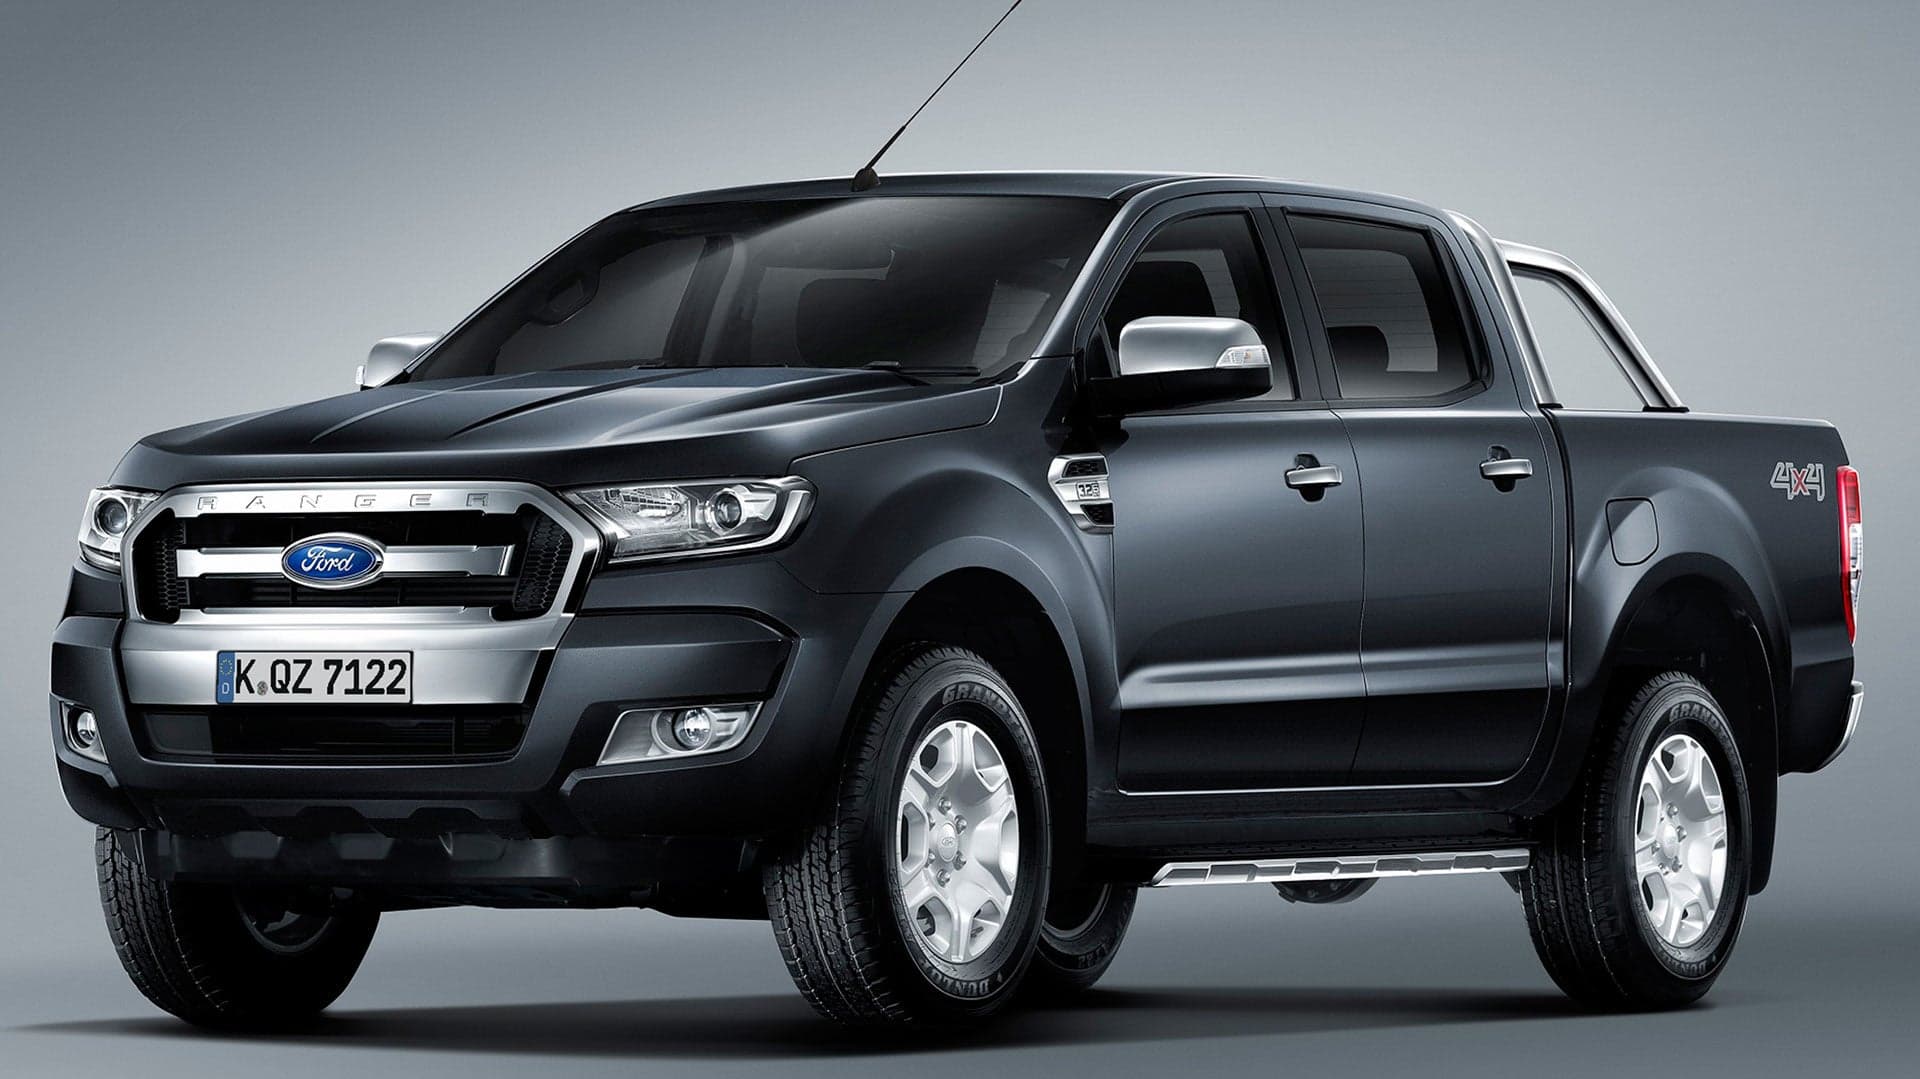 Report Suggests the 2019 Ford Ranger Could Pack a 310-HP EcoBoost Engine